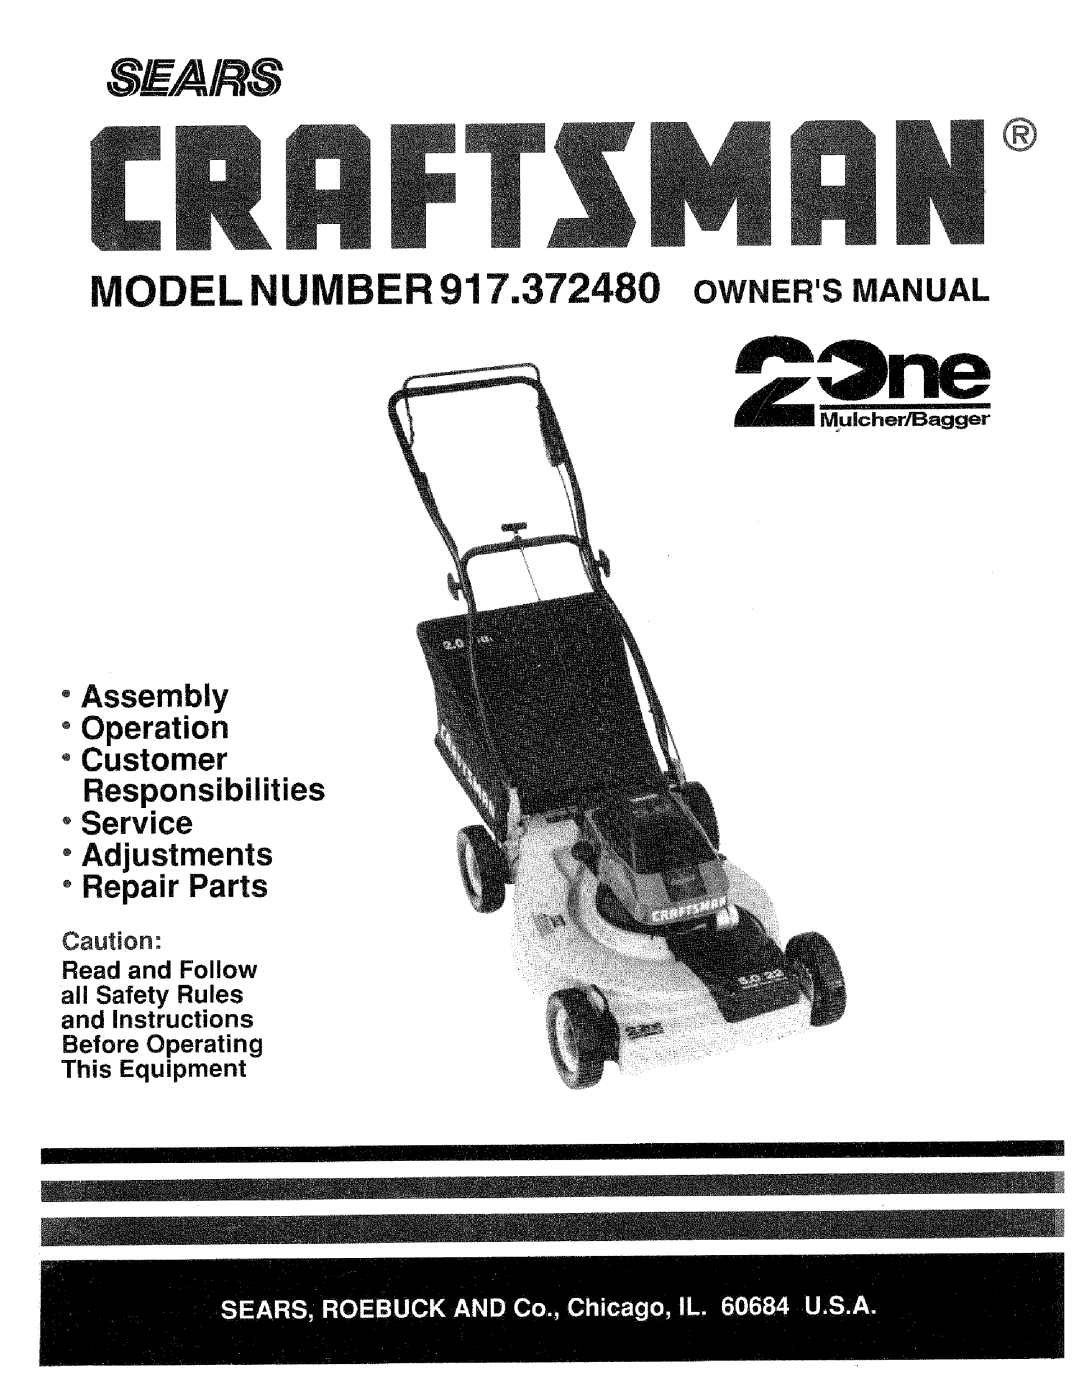 Craftsman 917.37248 owner manual oAssembly oOperation oCustomer Responsibilities, oService Adjustments o Repair Parts 